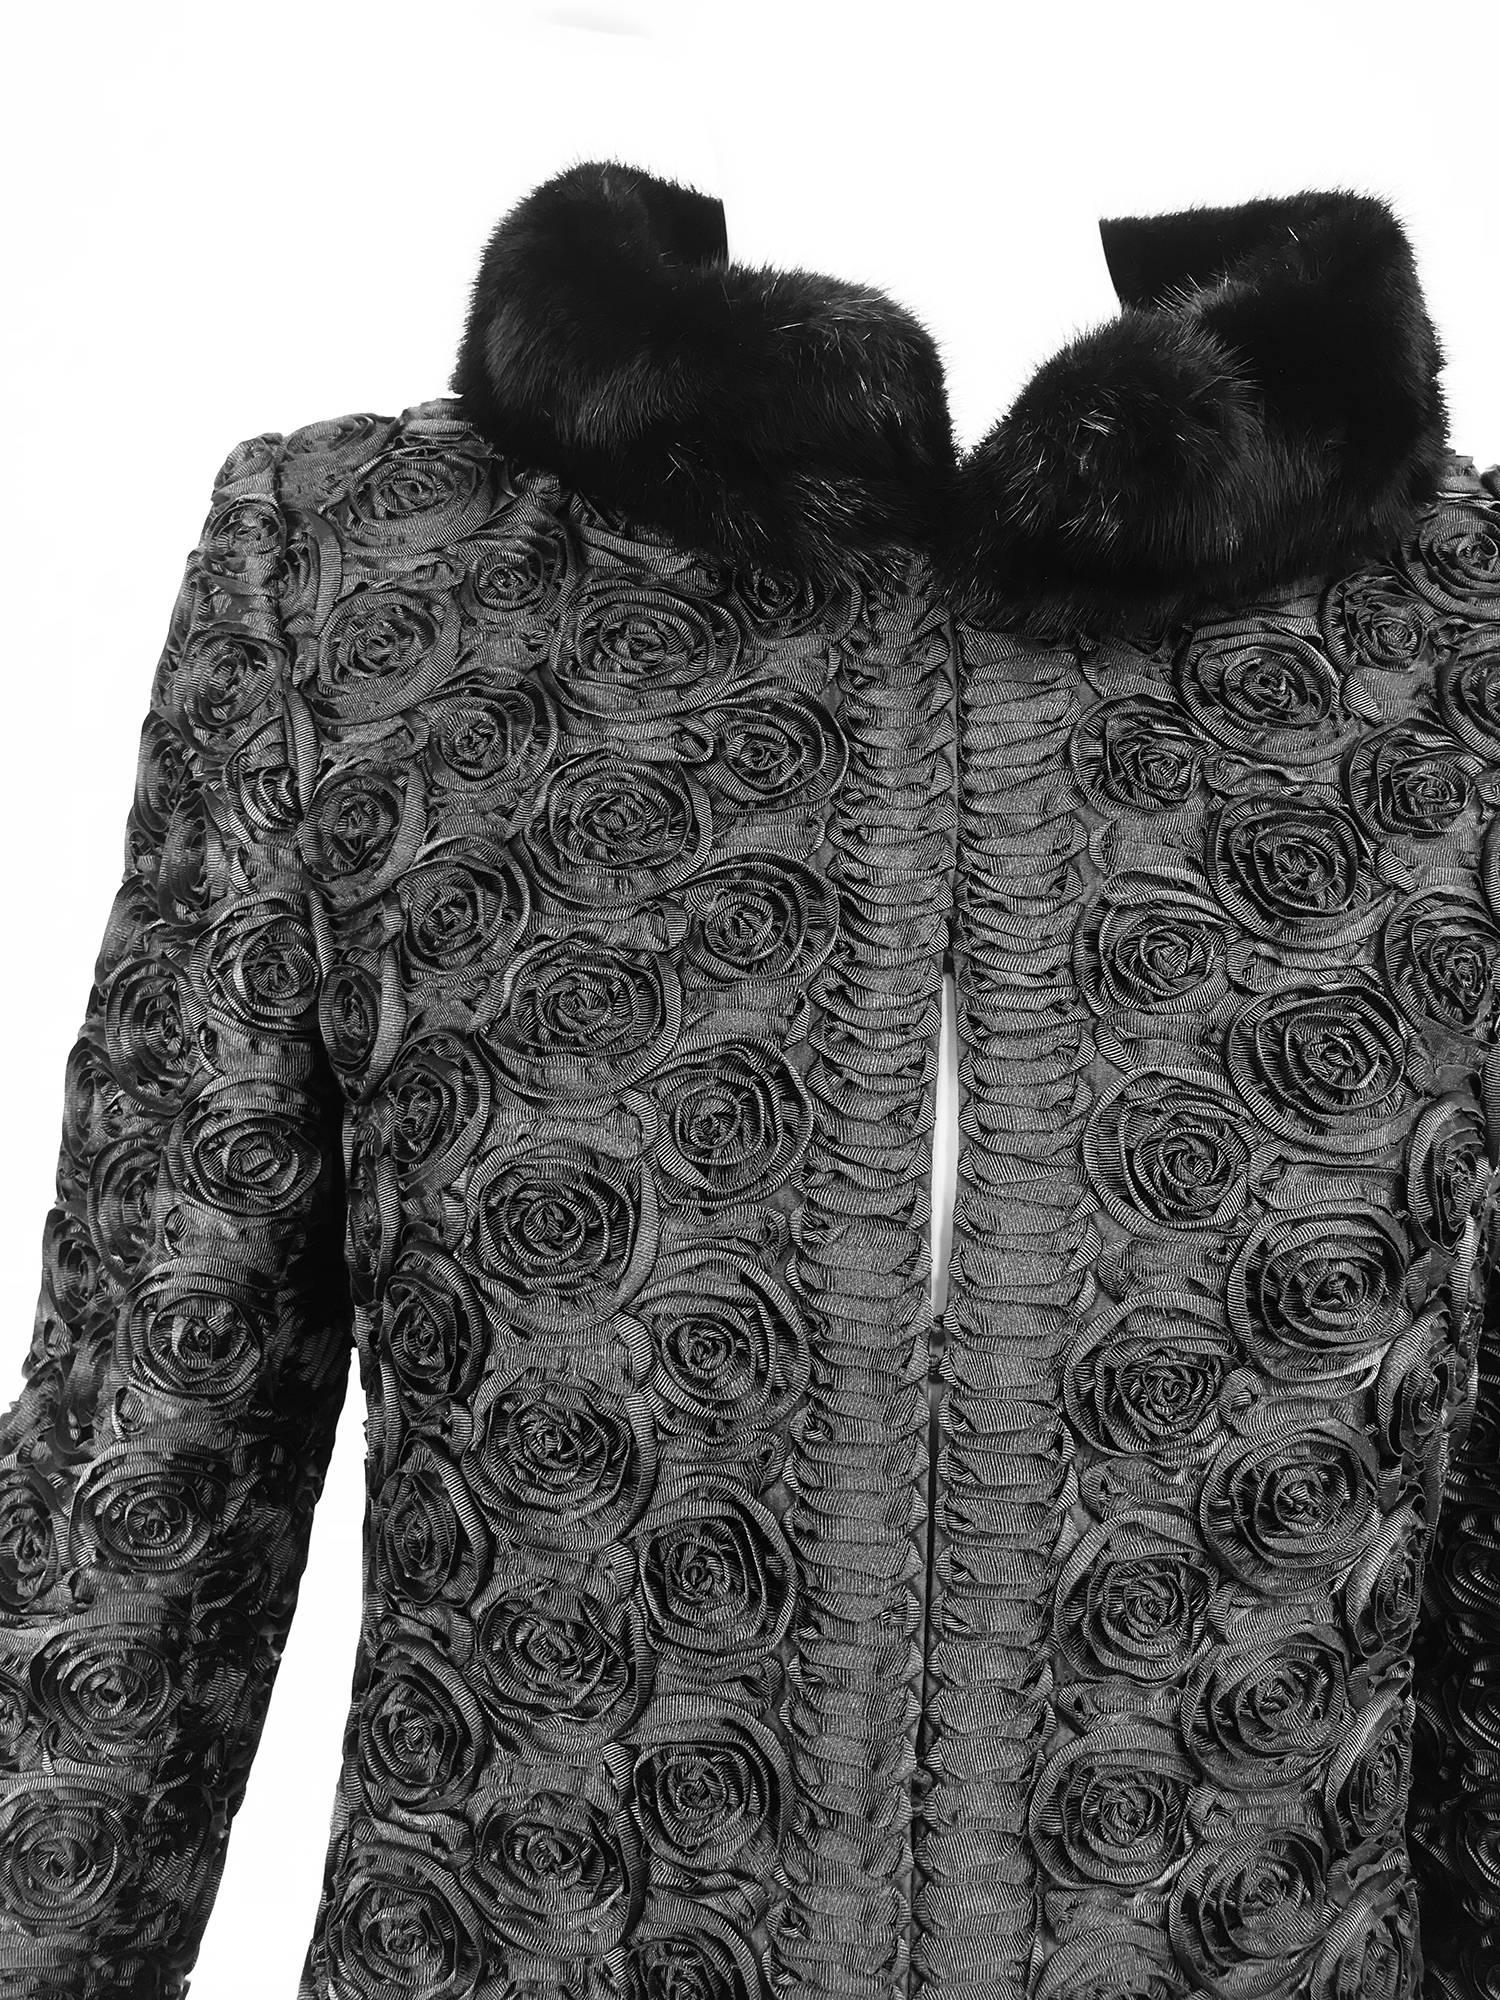 Valentino black silk faille applique coat with mink collar. The fabric is sewn with three dimensional ribbons of silk faille in the shape of roses, the facings are interwoven ribbons of silk faille that form a geometric pattern. Princess seamed coat